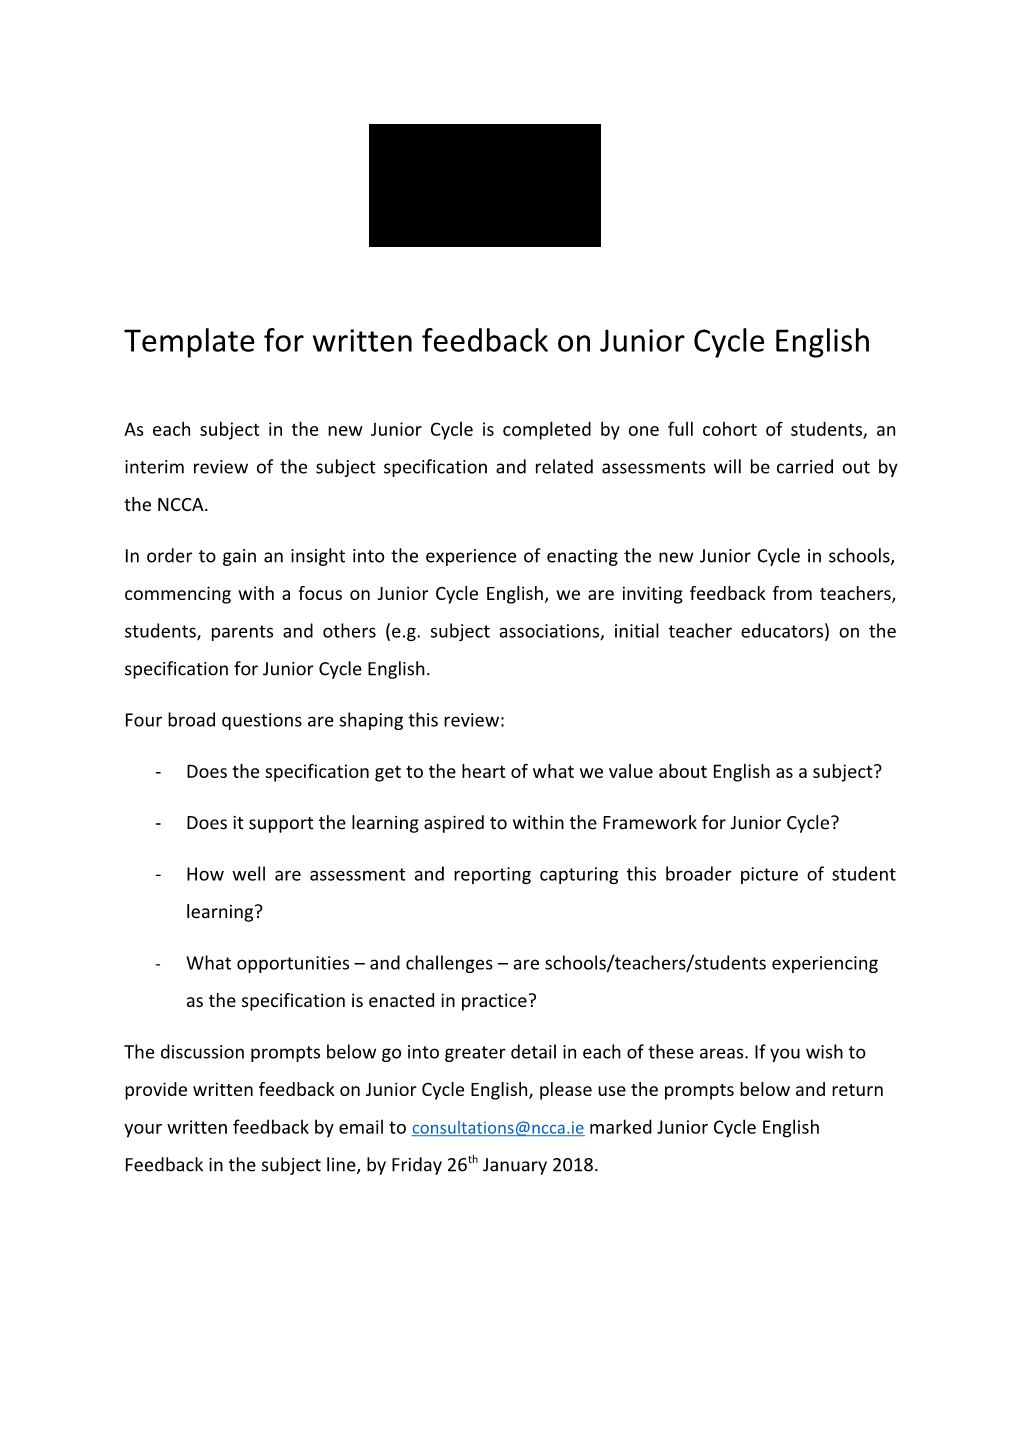 Template for Written Feedback on Junior Cycle English